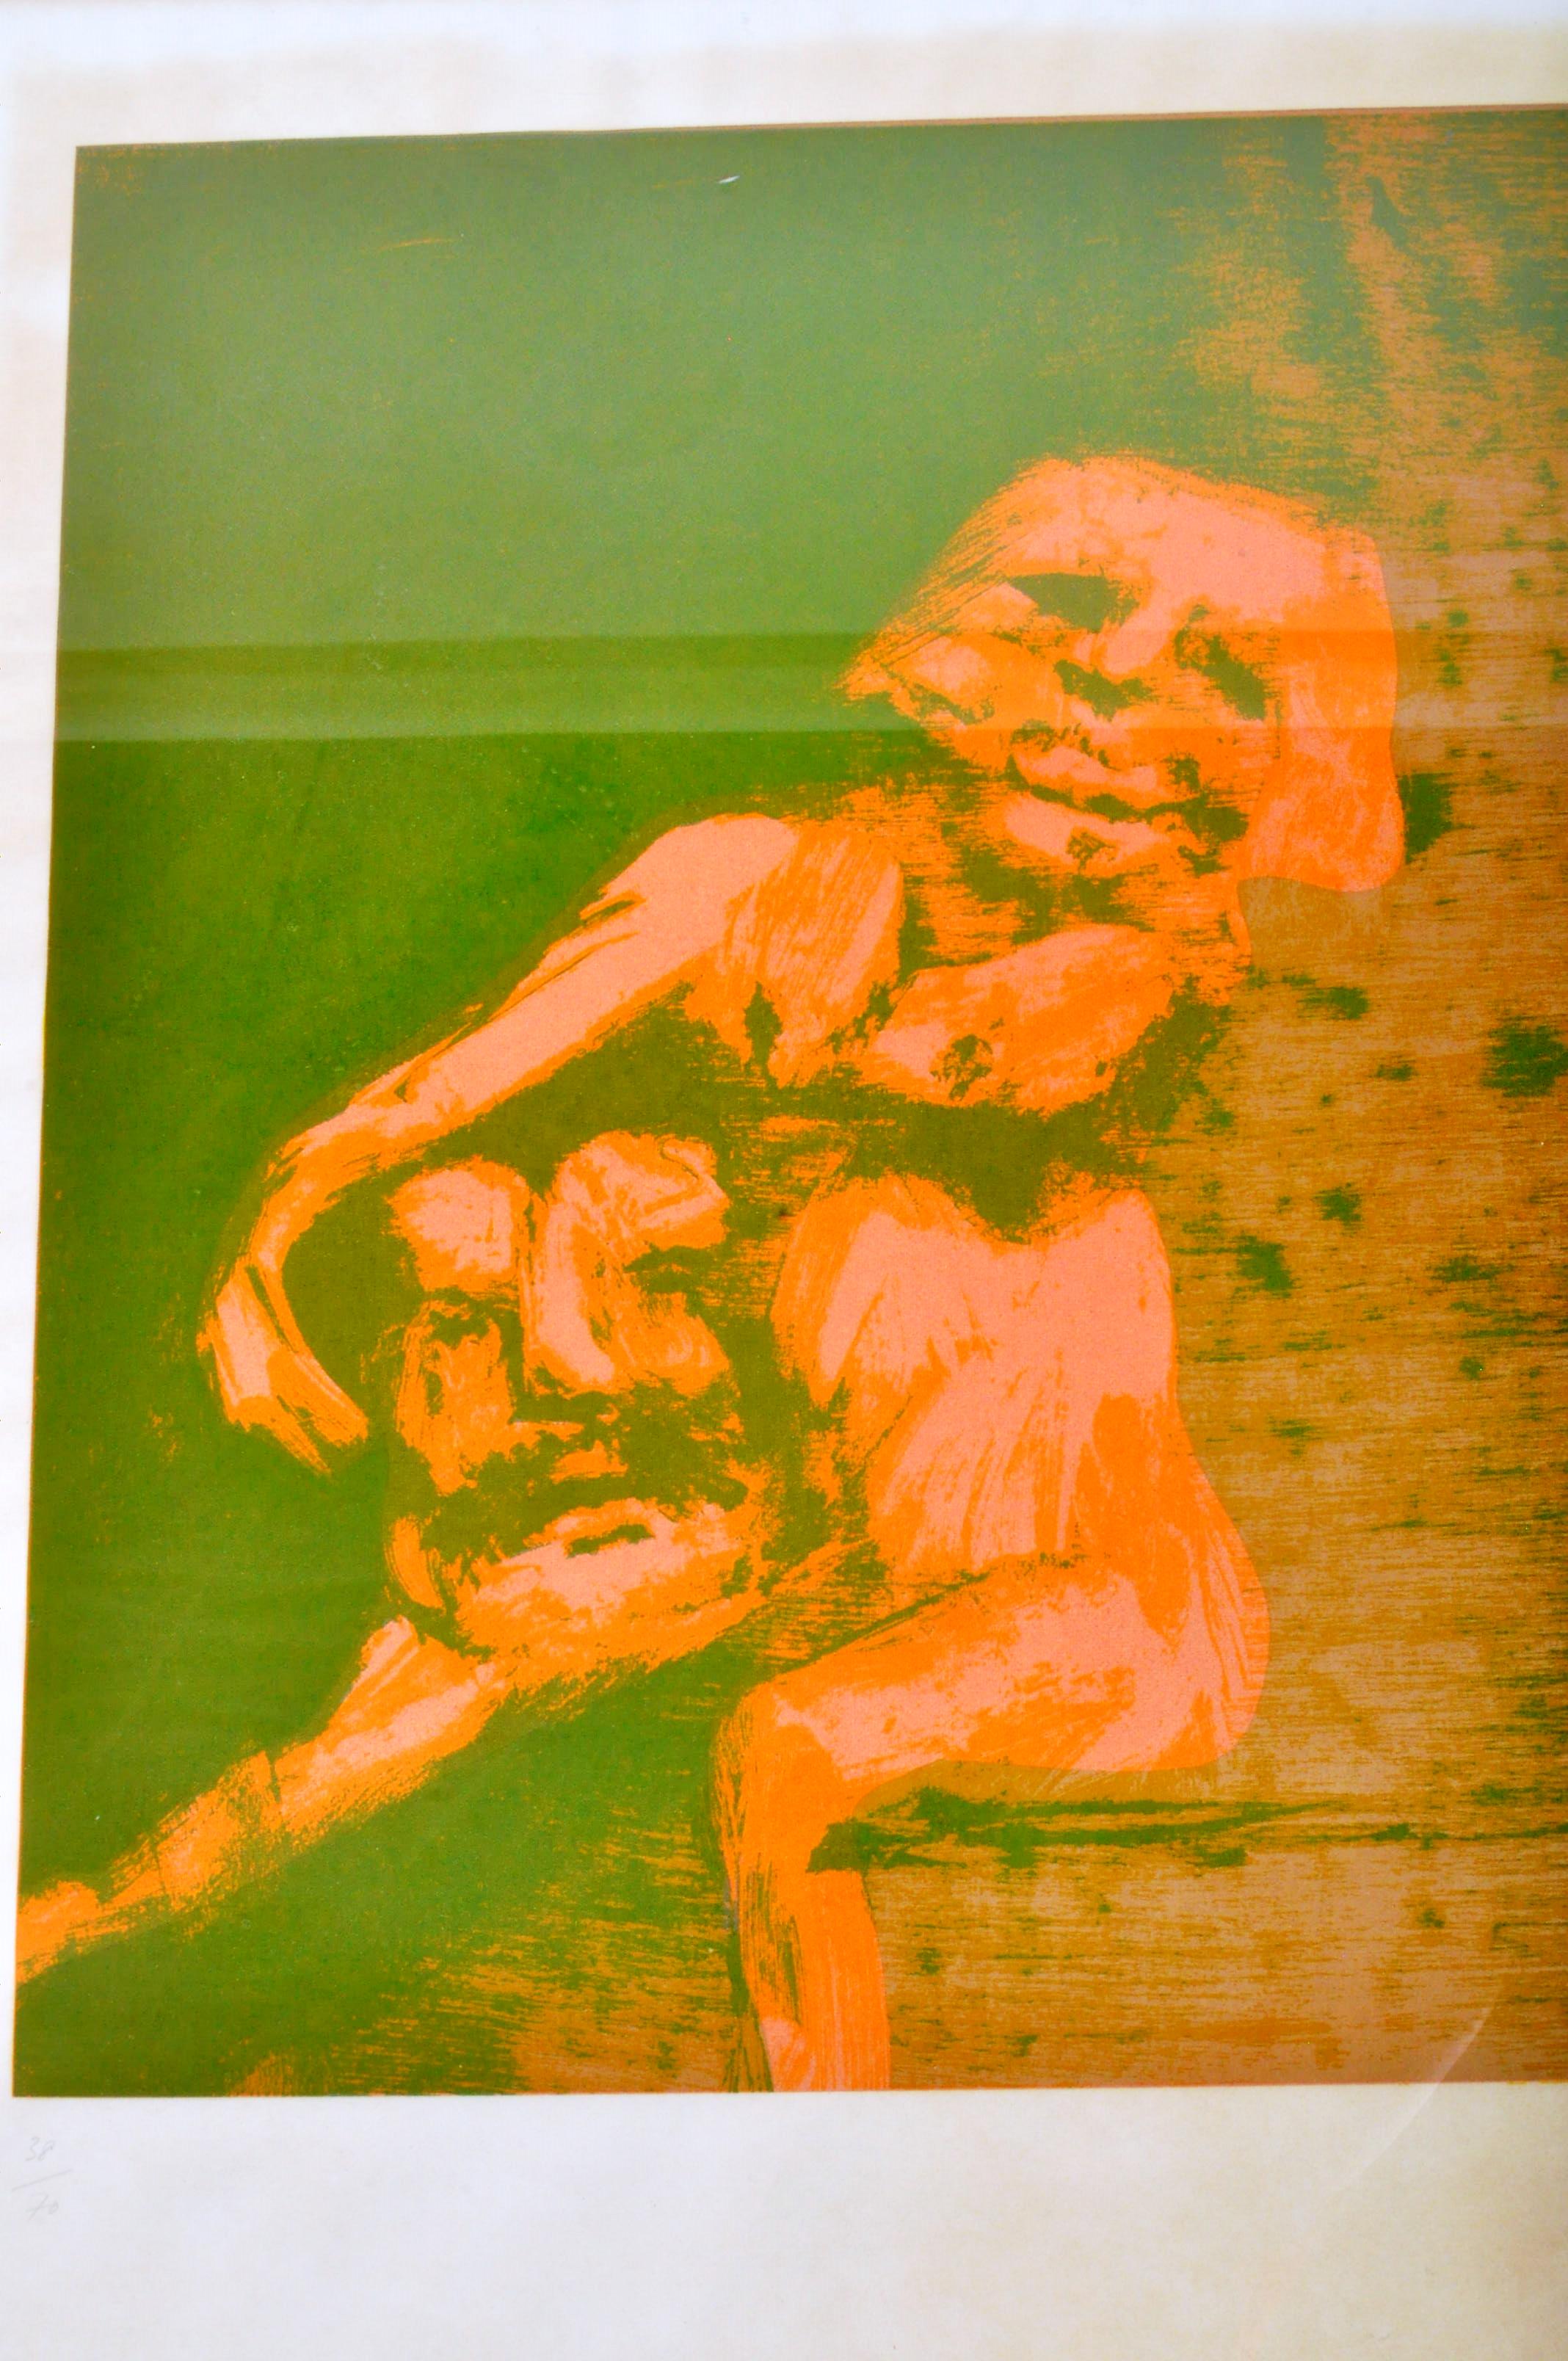 SIR SIDNEY NOLAN - MID CENTURY SILK SCREEN PRINT SIGNED AND NUMBERED - Image 2 of 6